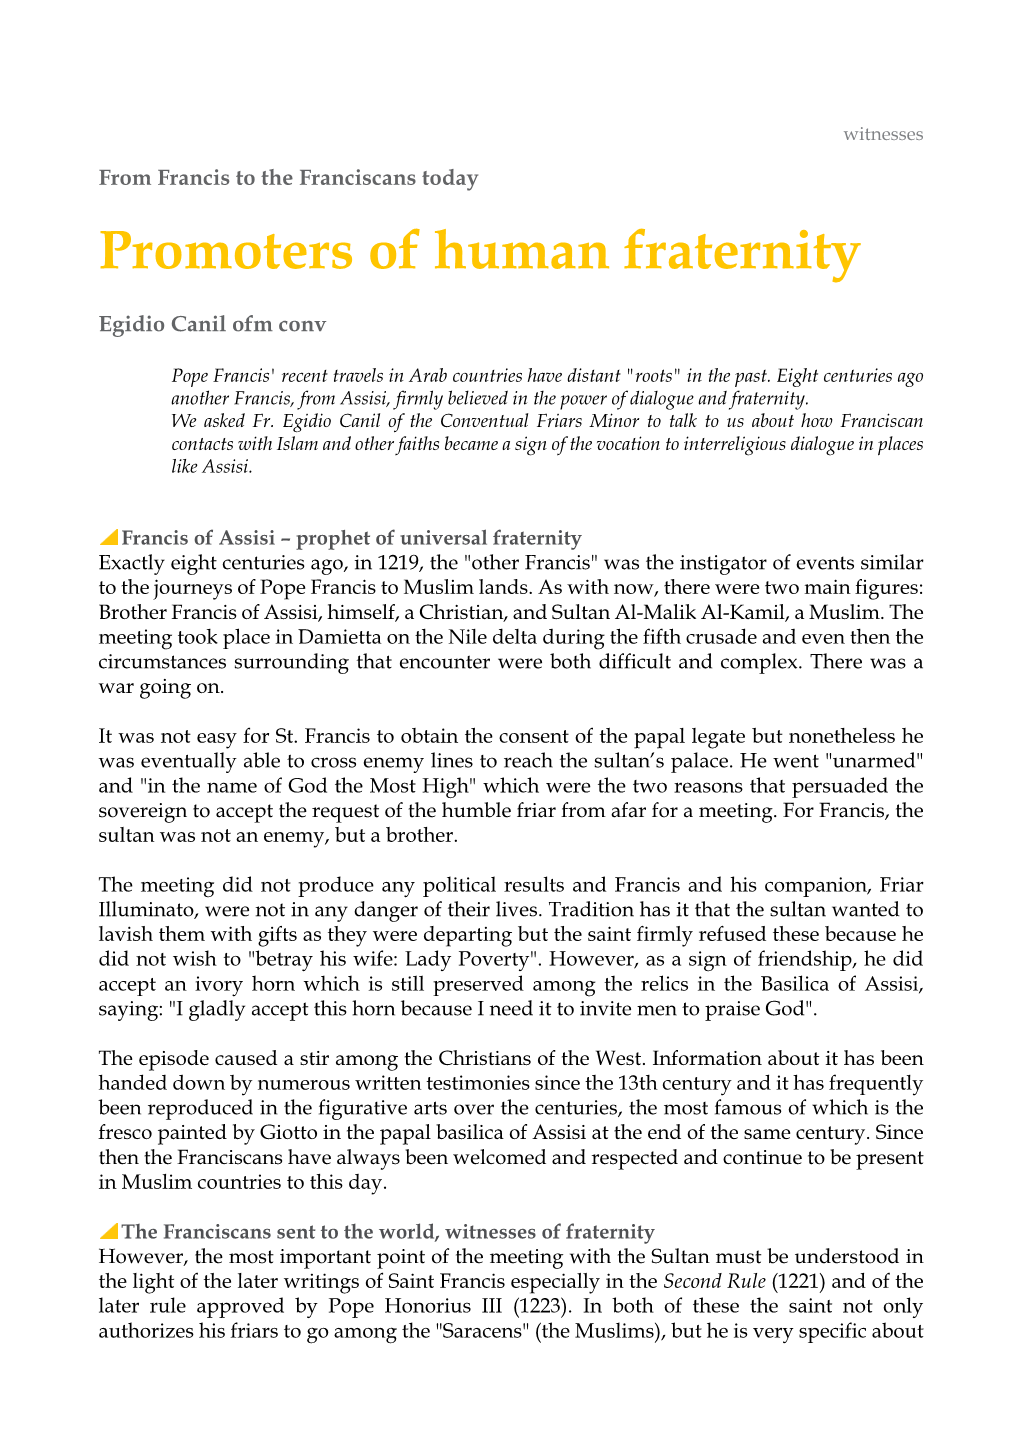 Promoters of Human Fraternity